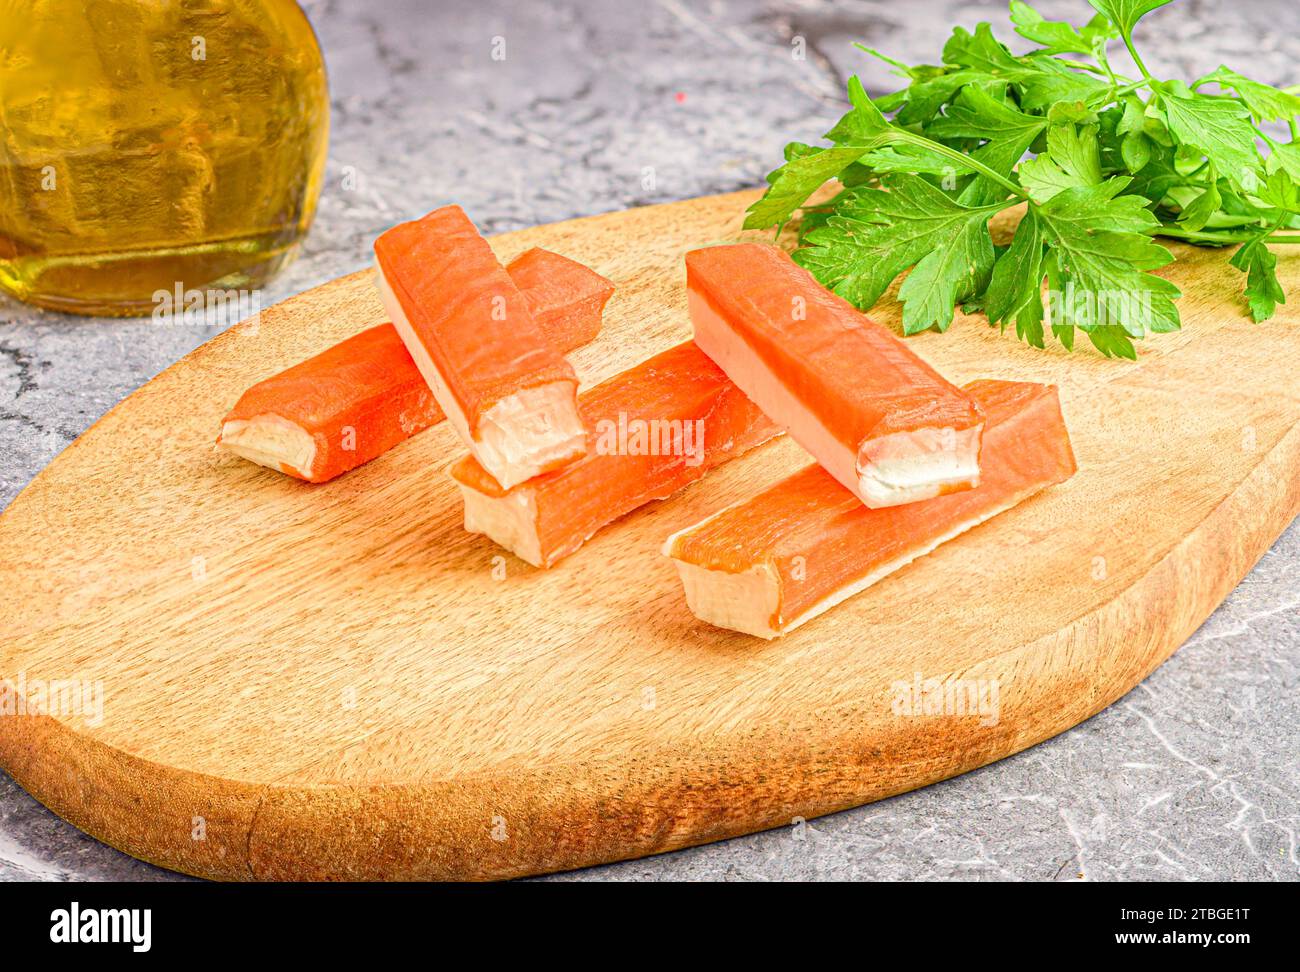 A cutting board with fresh surimi and whole green parsley Stock Photo